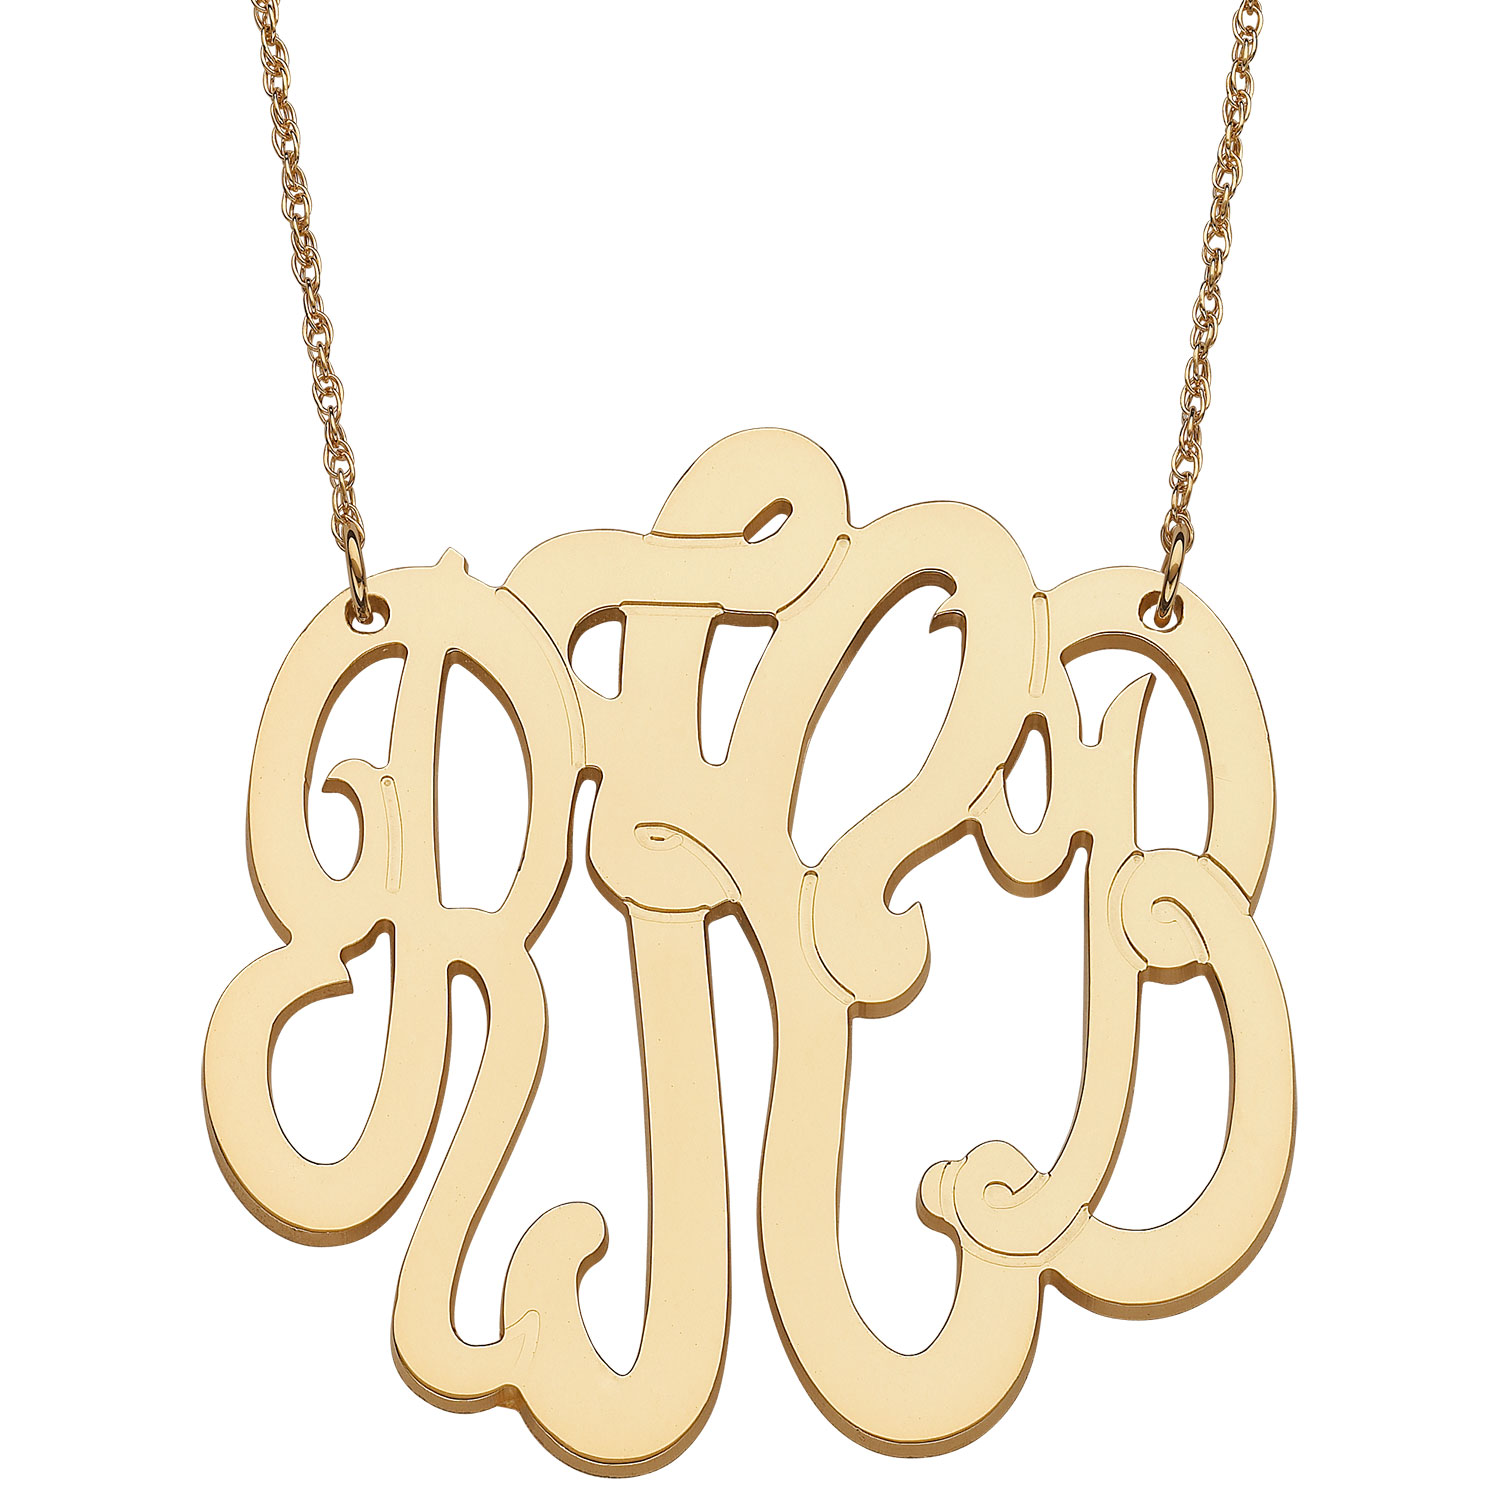 14K Gold over Sterling 3 Initial Monogram Necklace - Extra Large